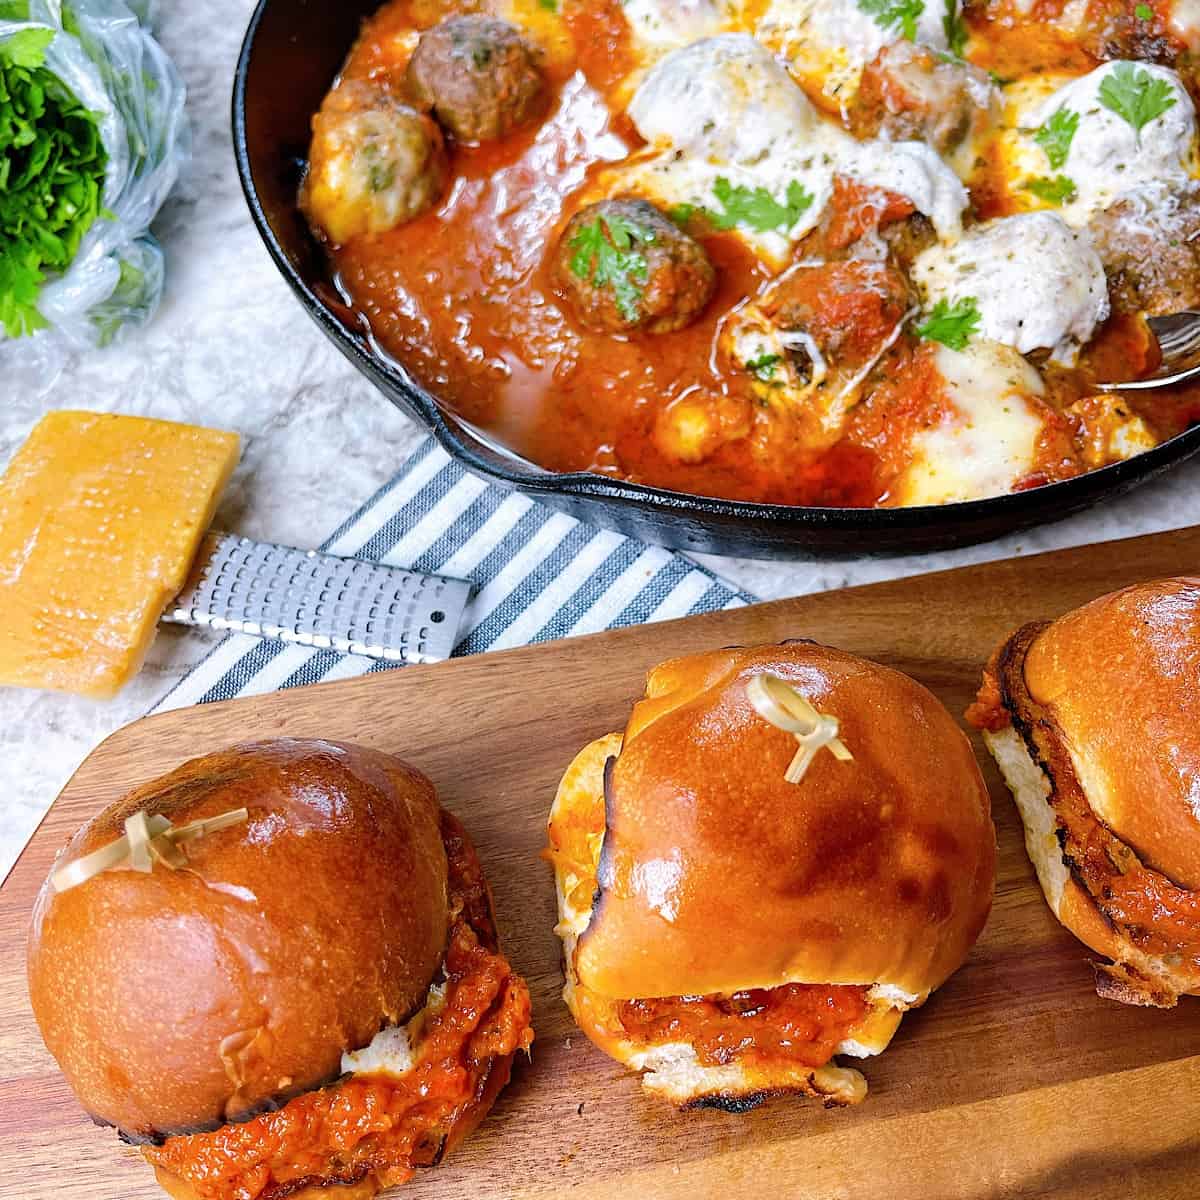 Meatball Sliders with melted cheese in skillet sitting next to sliders